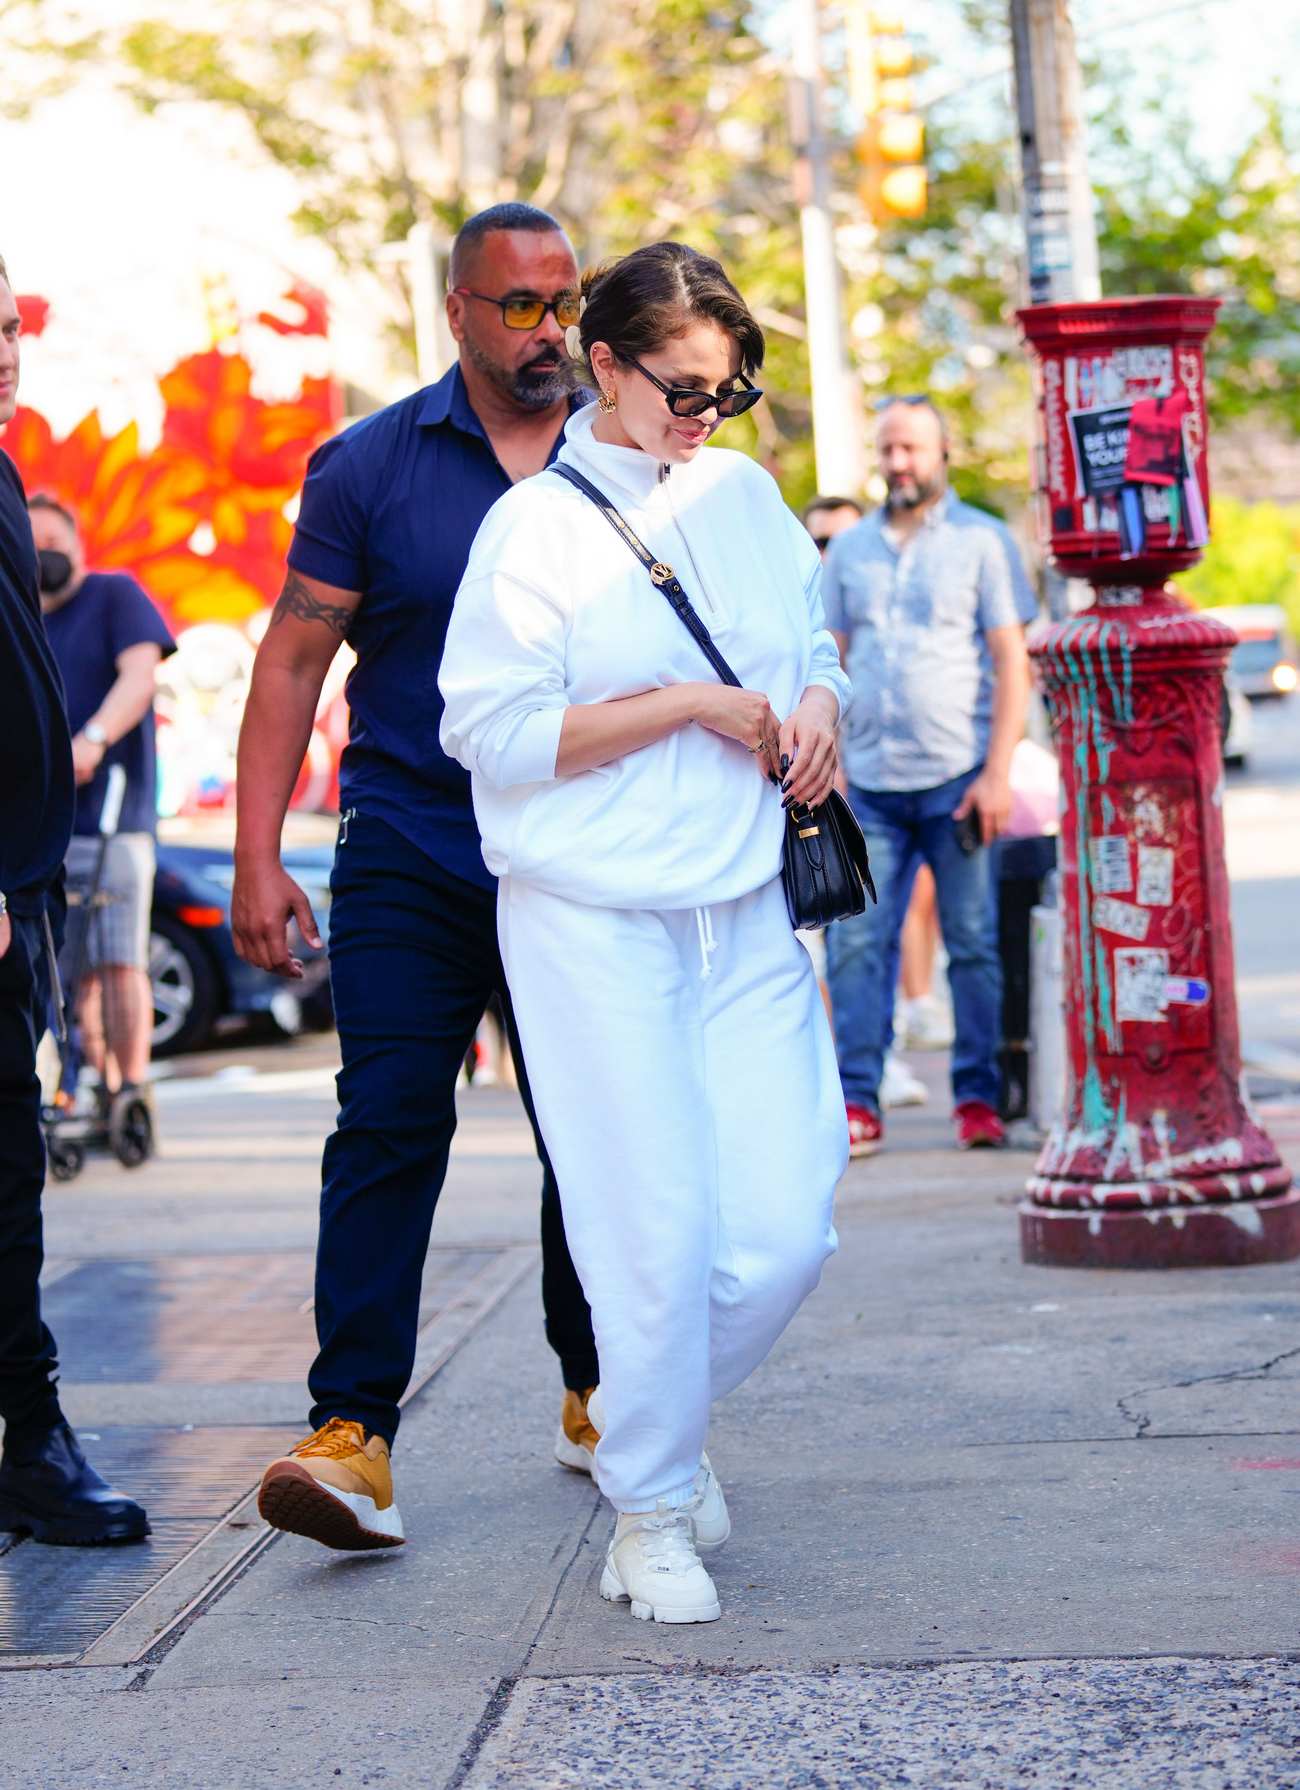 Selena Gomez at Shun Lee restaurant with Sofia Carson in New York City on May 15